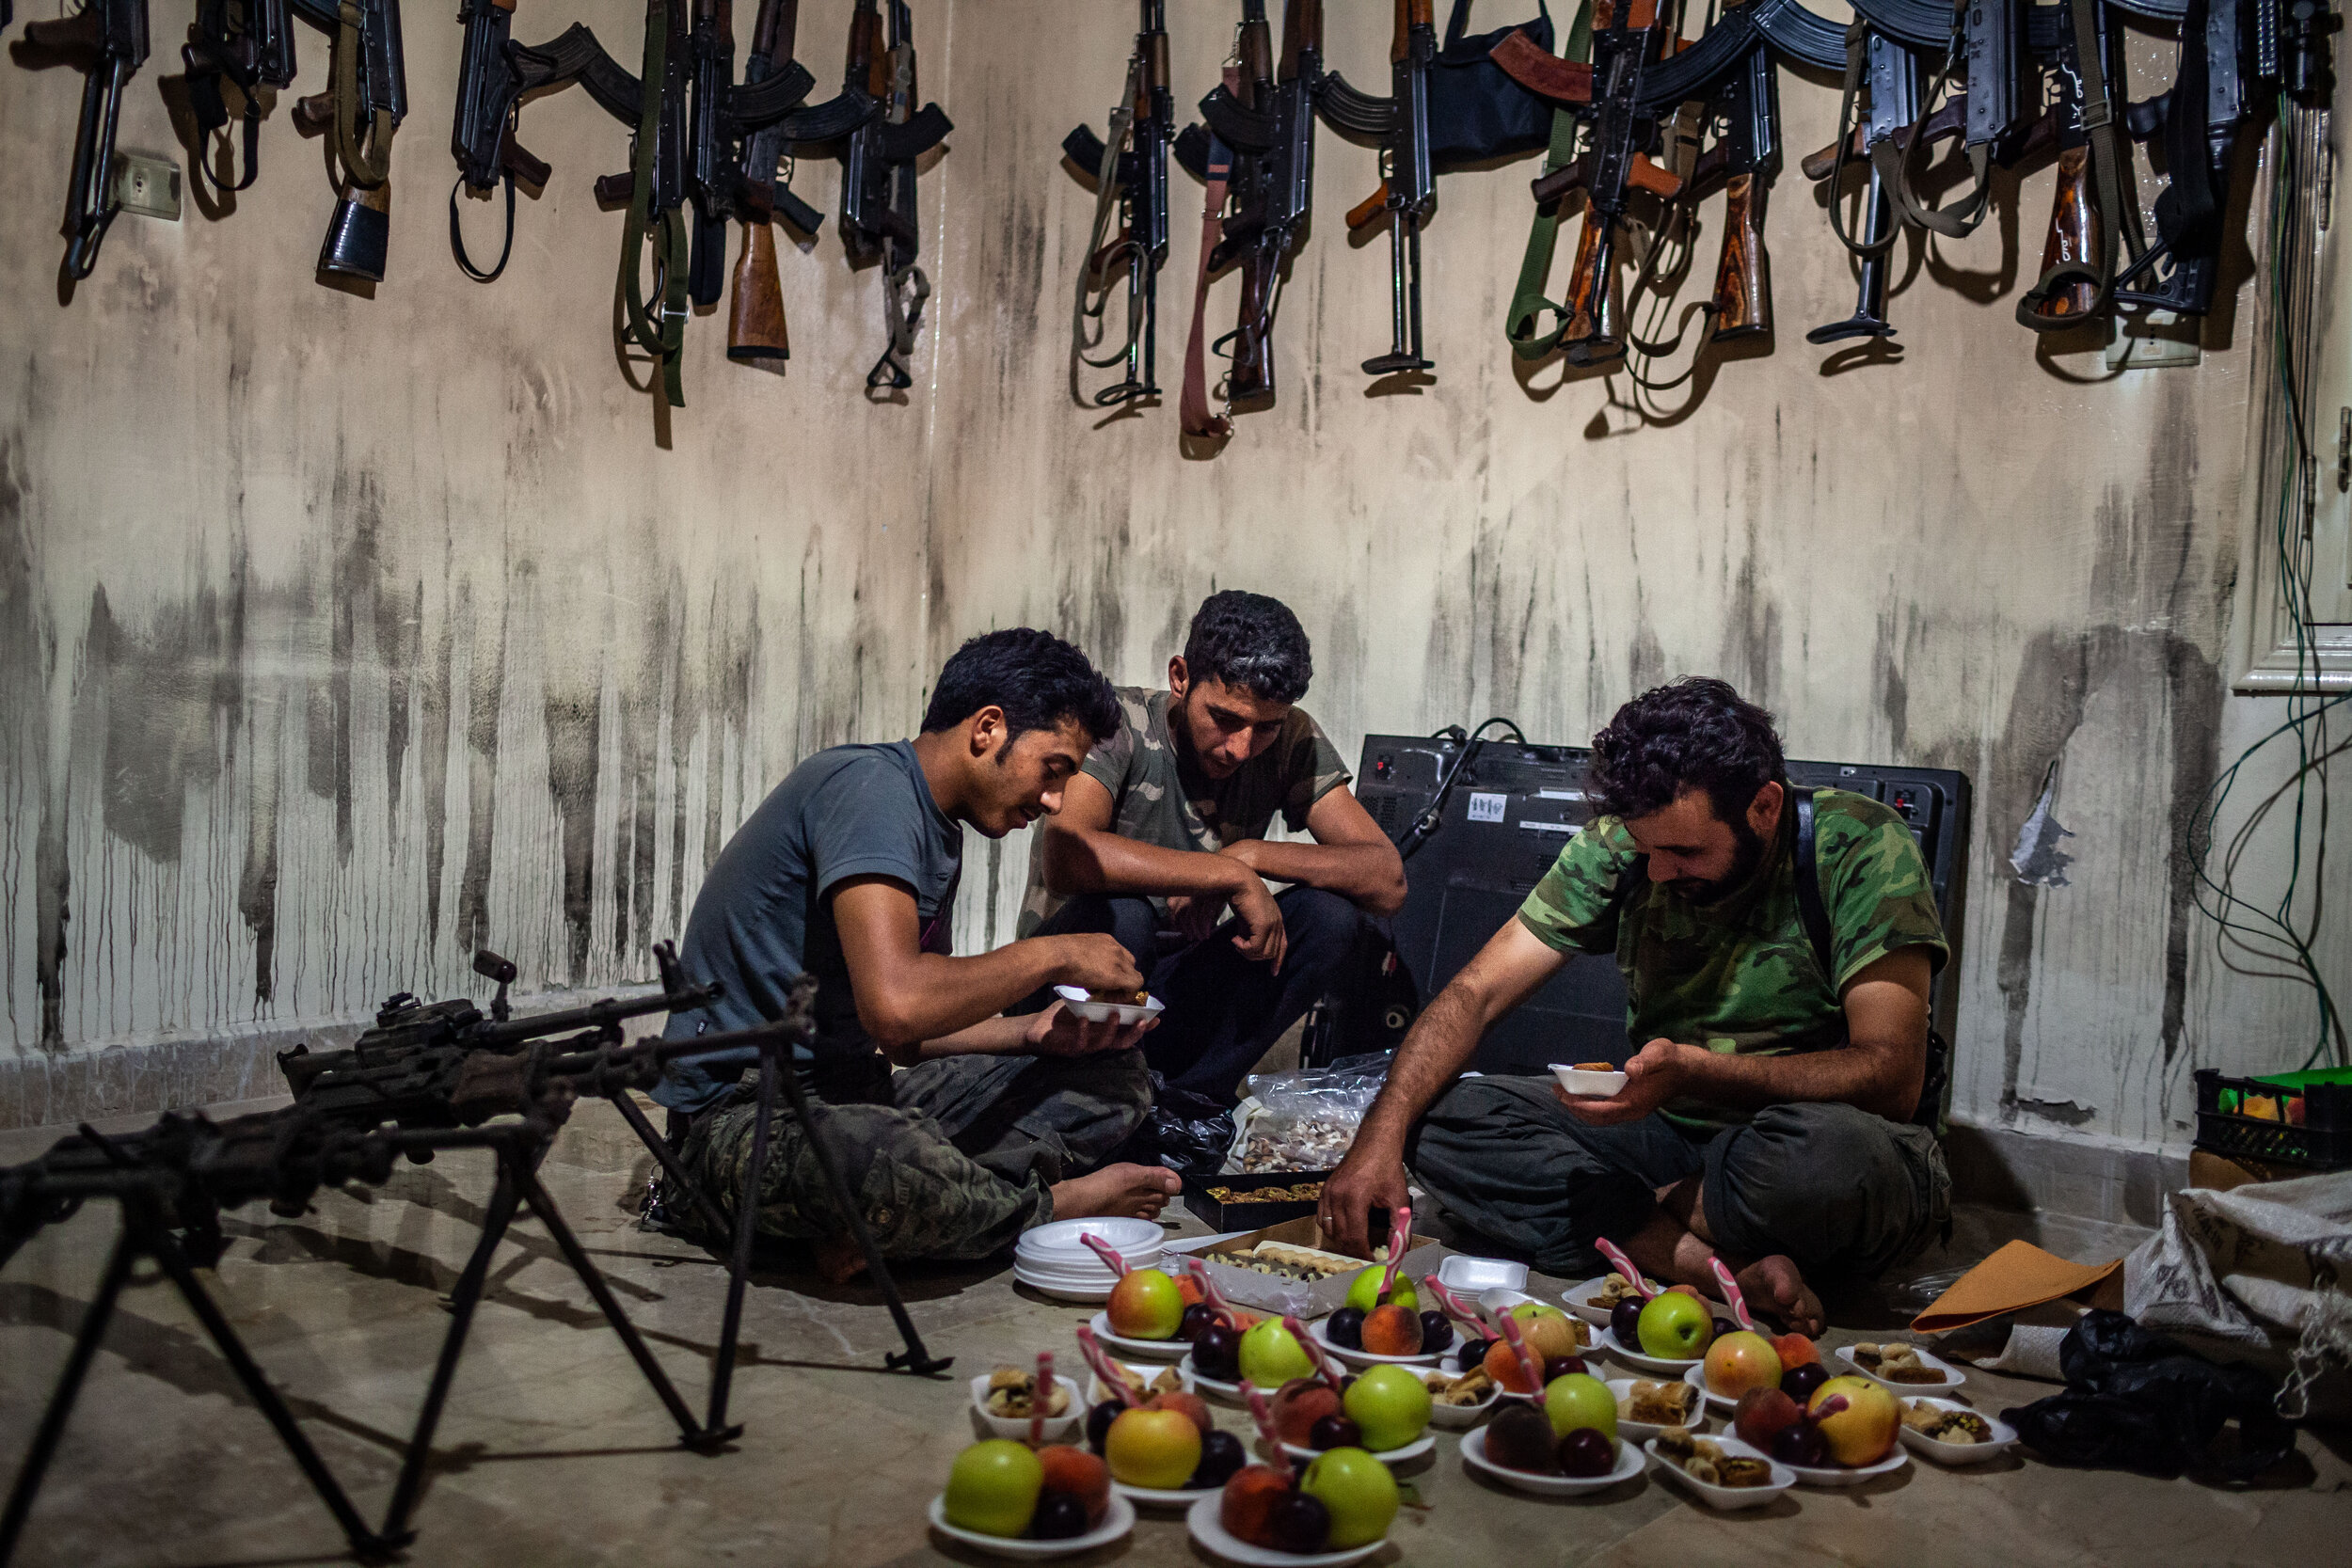  8/12/2012 Tal Rifaat, Syria: Deeb Maldaoun, 30, right, Jamal Abu Houran, 29, center, and Ahmad Aanzi, 19, left, of the Lions of Tawhid unit of the Free Syrian Army prepared fruit plates for their fellow fighters, in the groups weapons storage room a